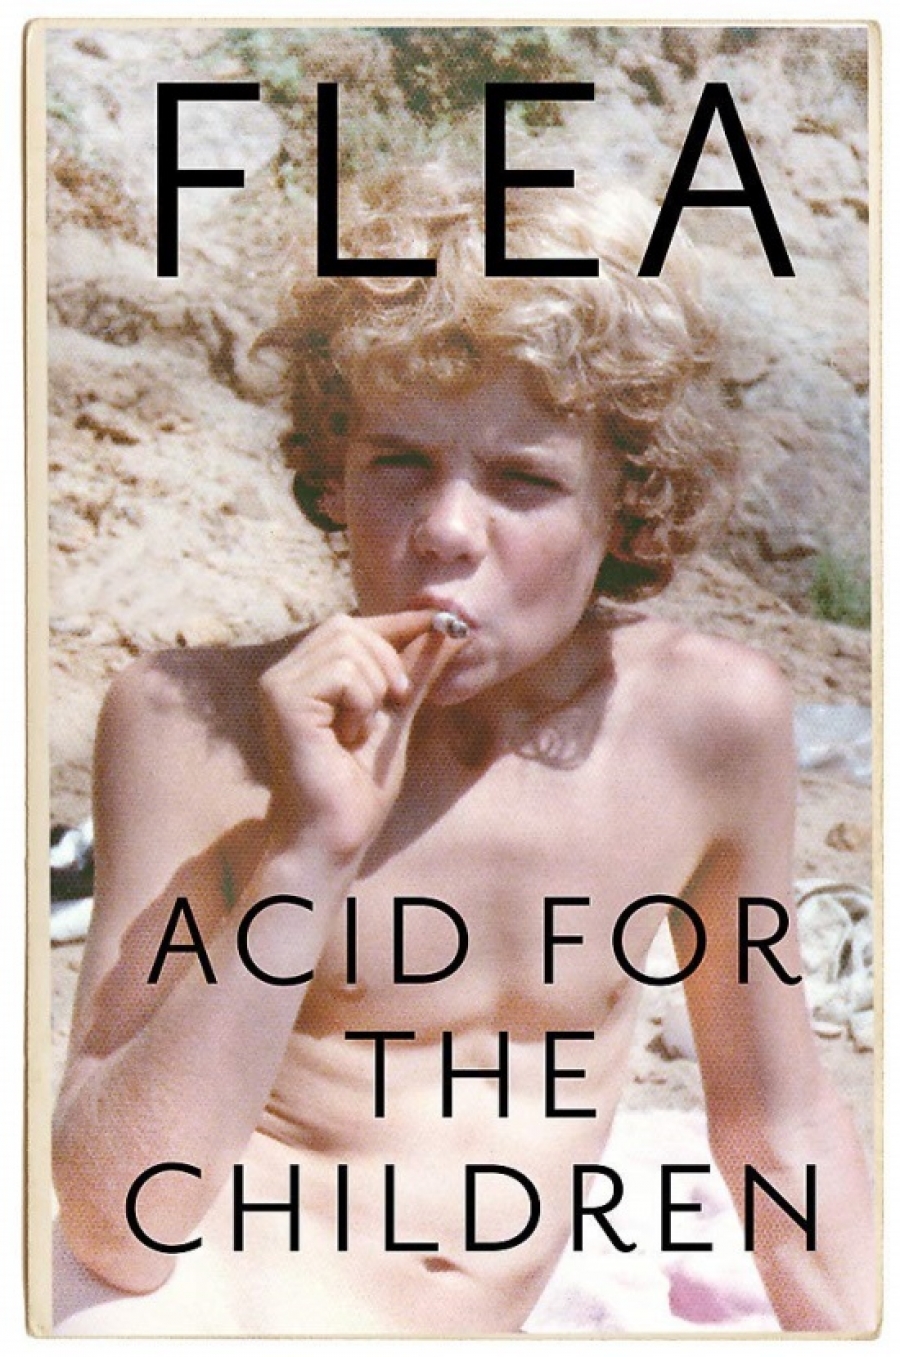 , Flea Acid For The Children - The autobiography of Flea, the Red Hot Chili Peppers legend 